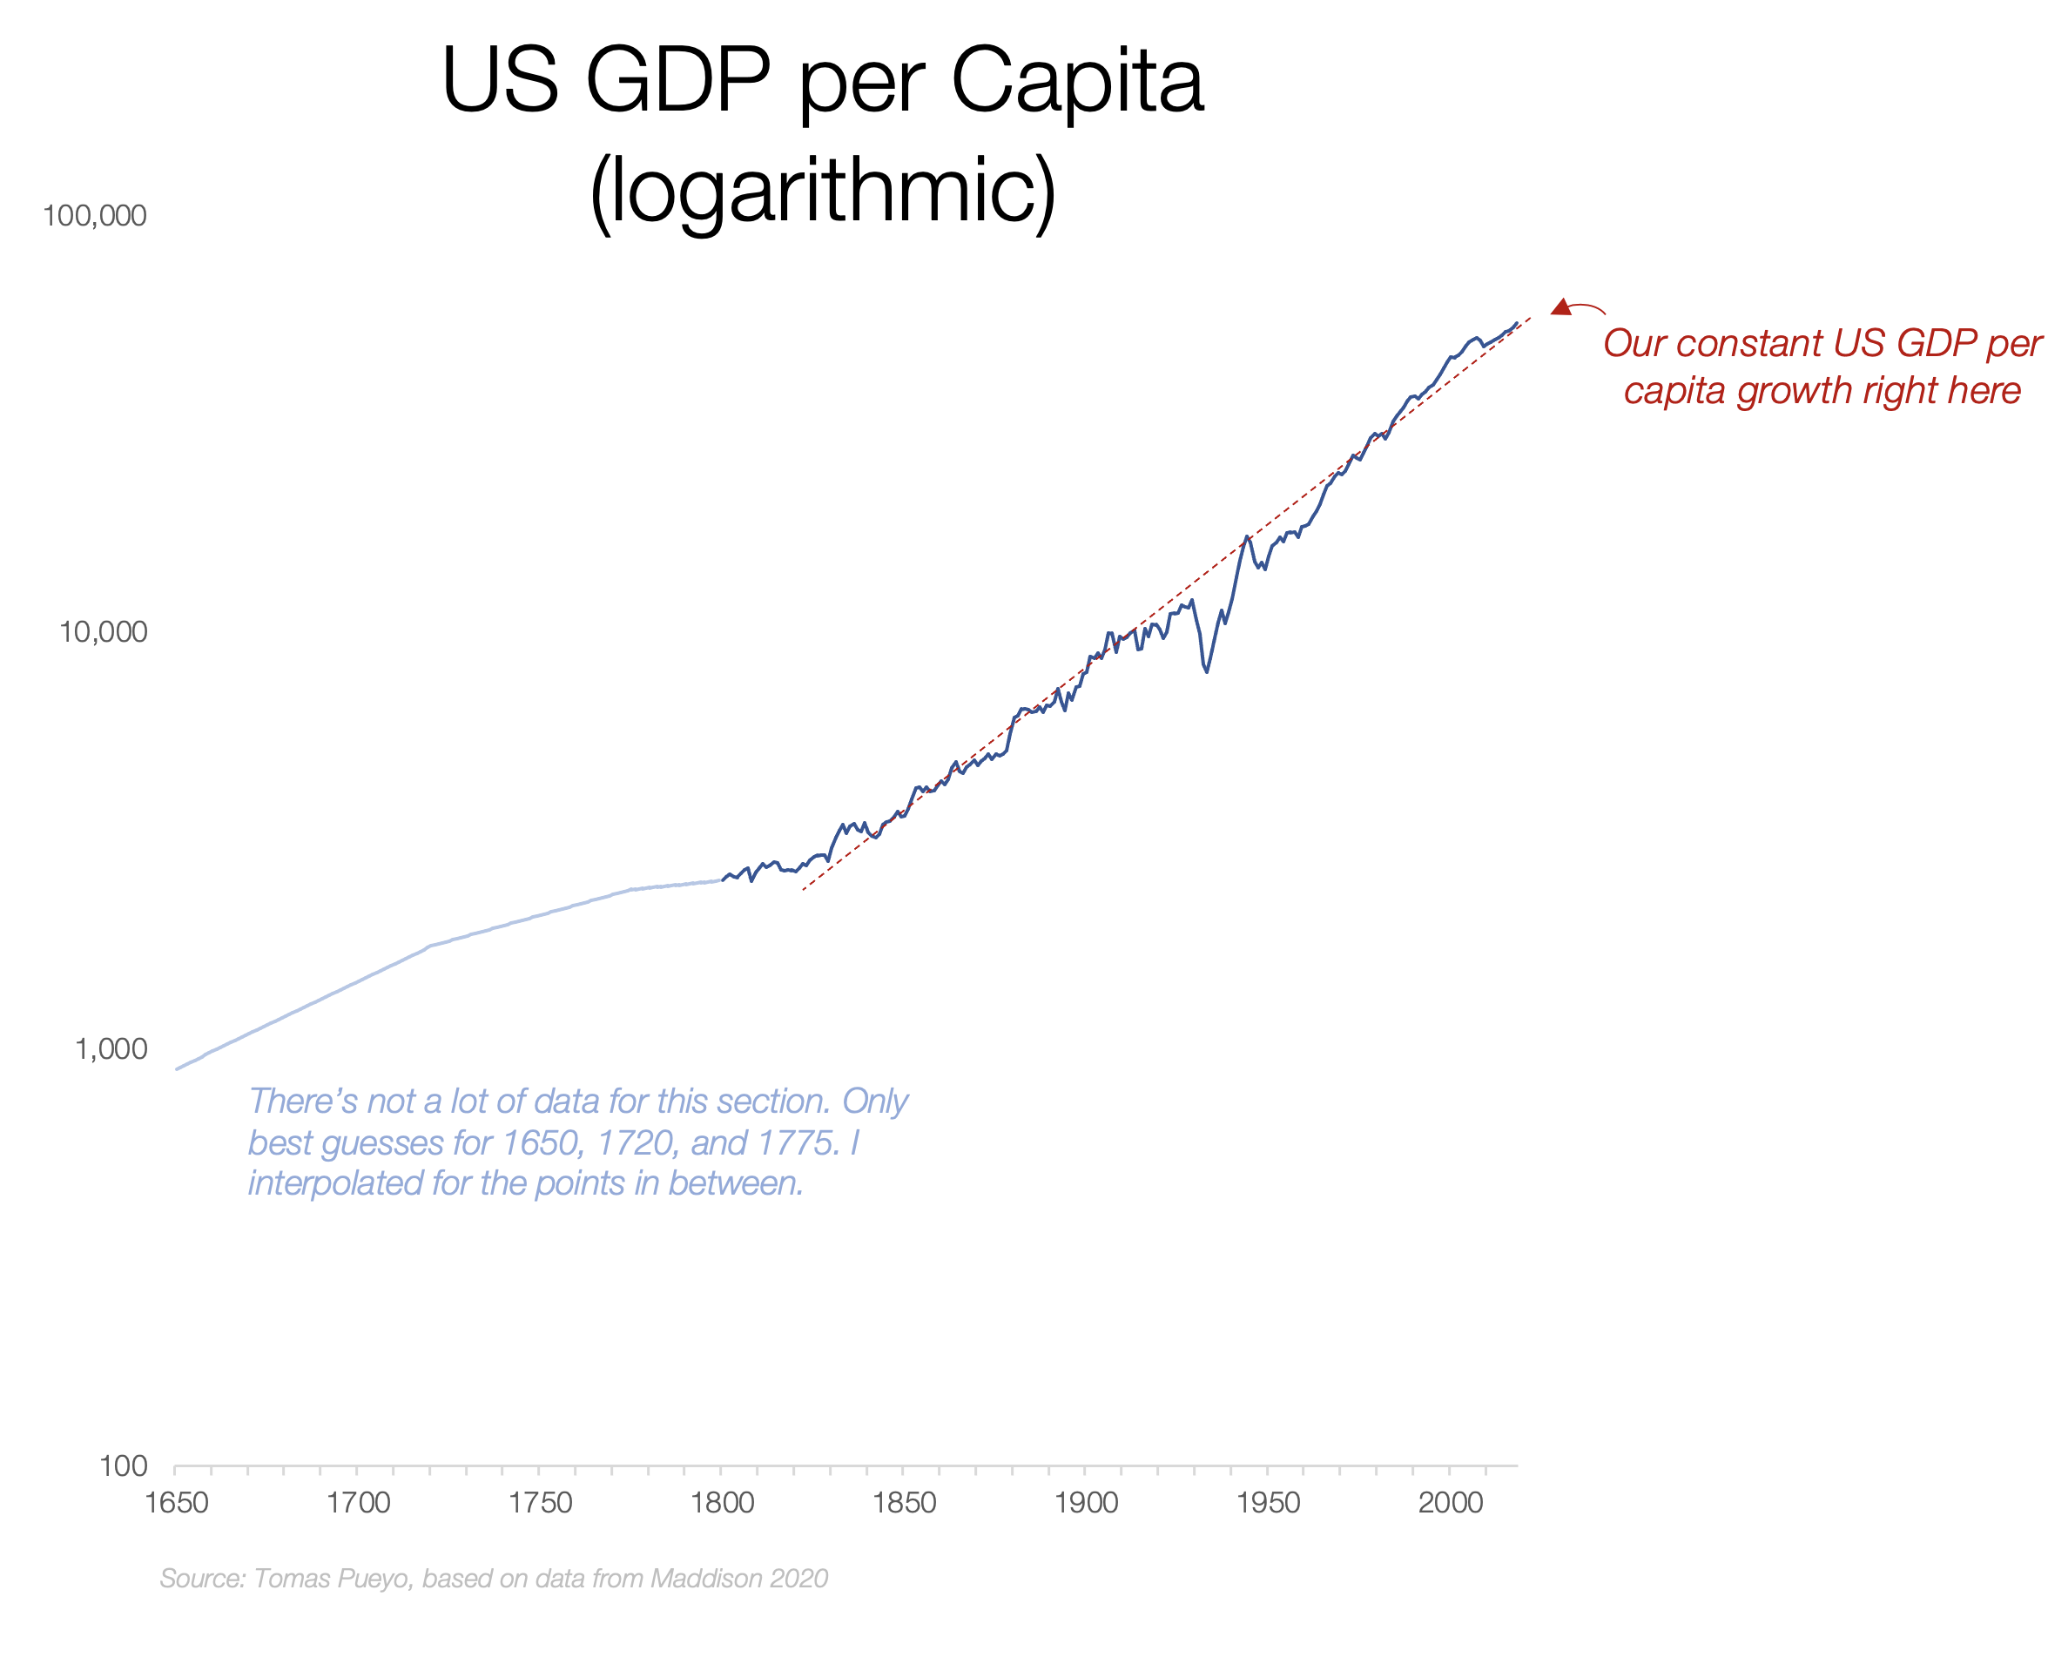 US GDP (logarithmic), journal of wild culture ©2021